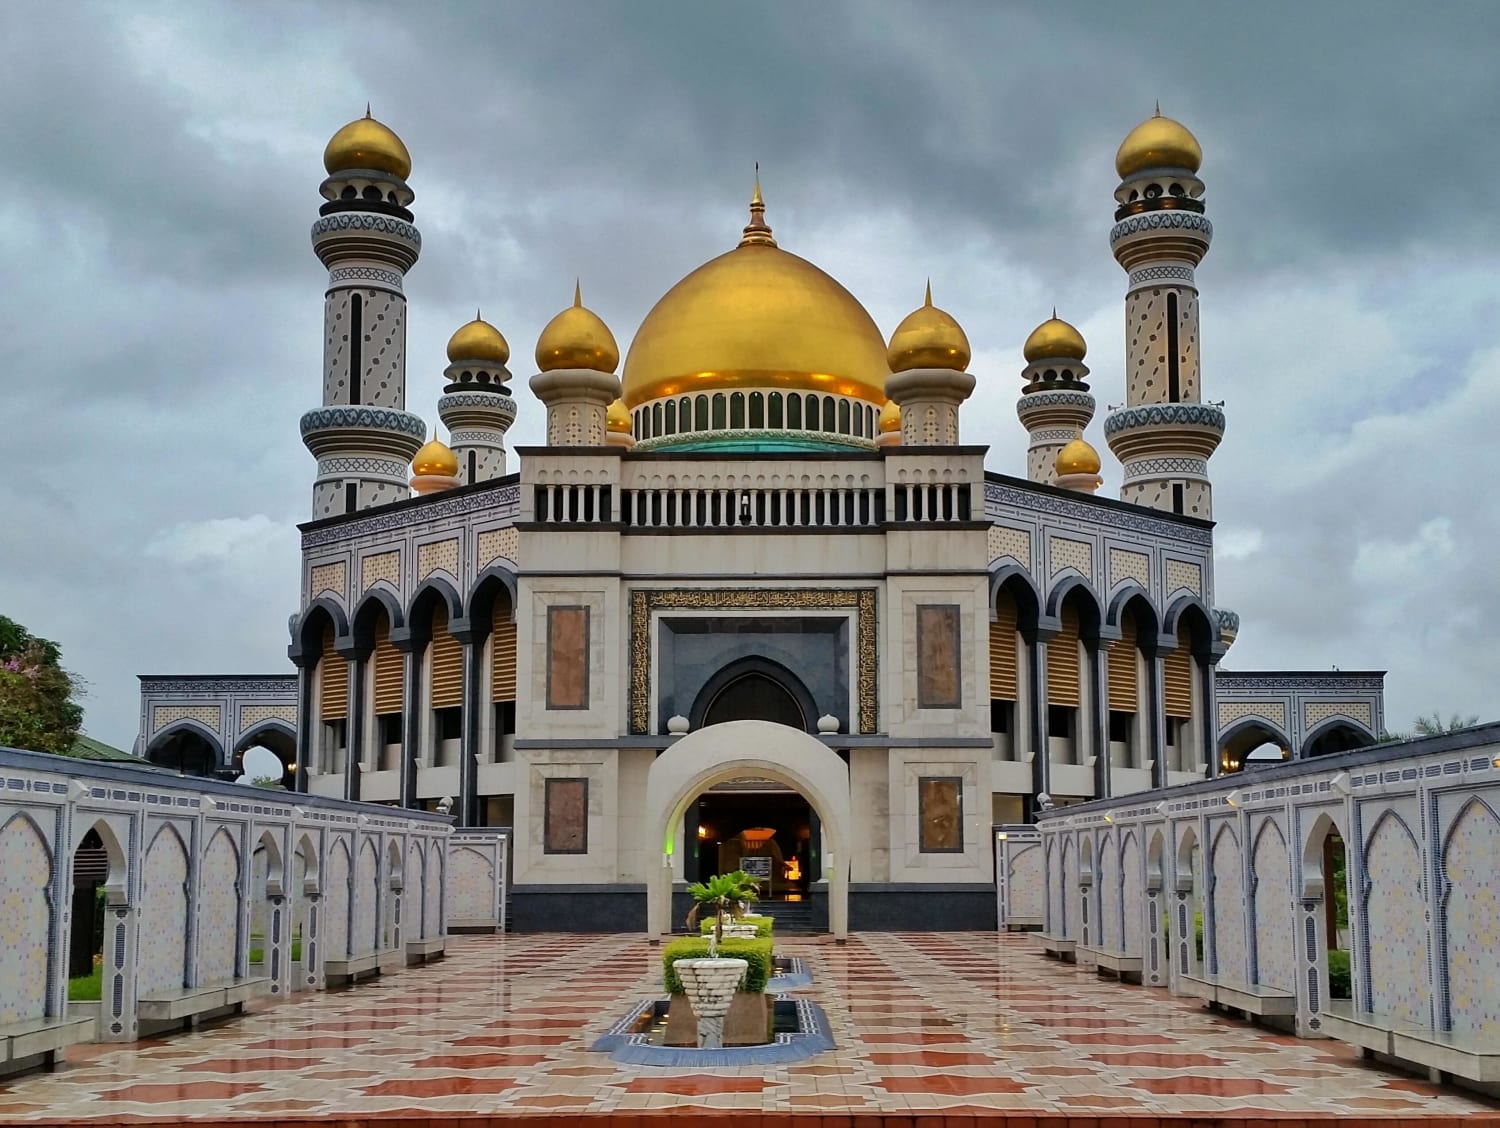 Jame' Asr Hassanil Bolkiah Mosque - Bandar Seri Begawan, Brunei - Constructed 1988 - The mosque has 29 golden domes and four minarets with a height of 58 meters (190 feet) - Considered to be a masterpiece of modern Islamic architecture throughout South Asia